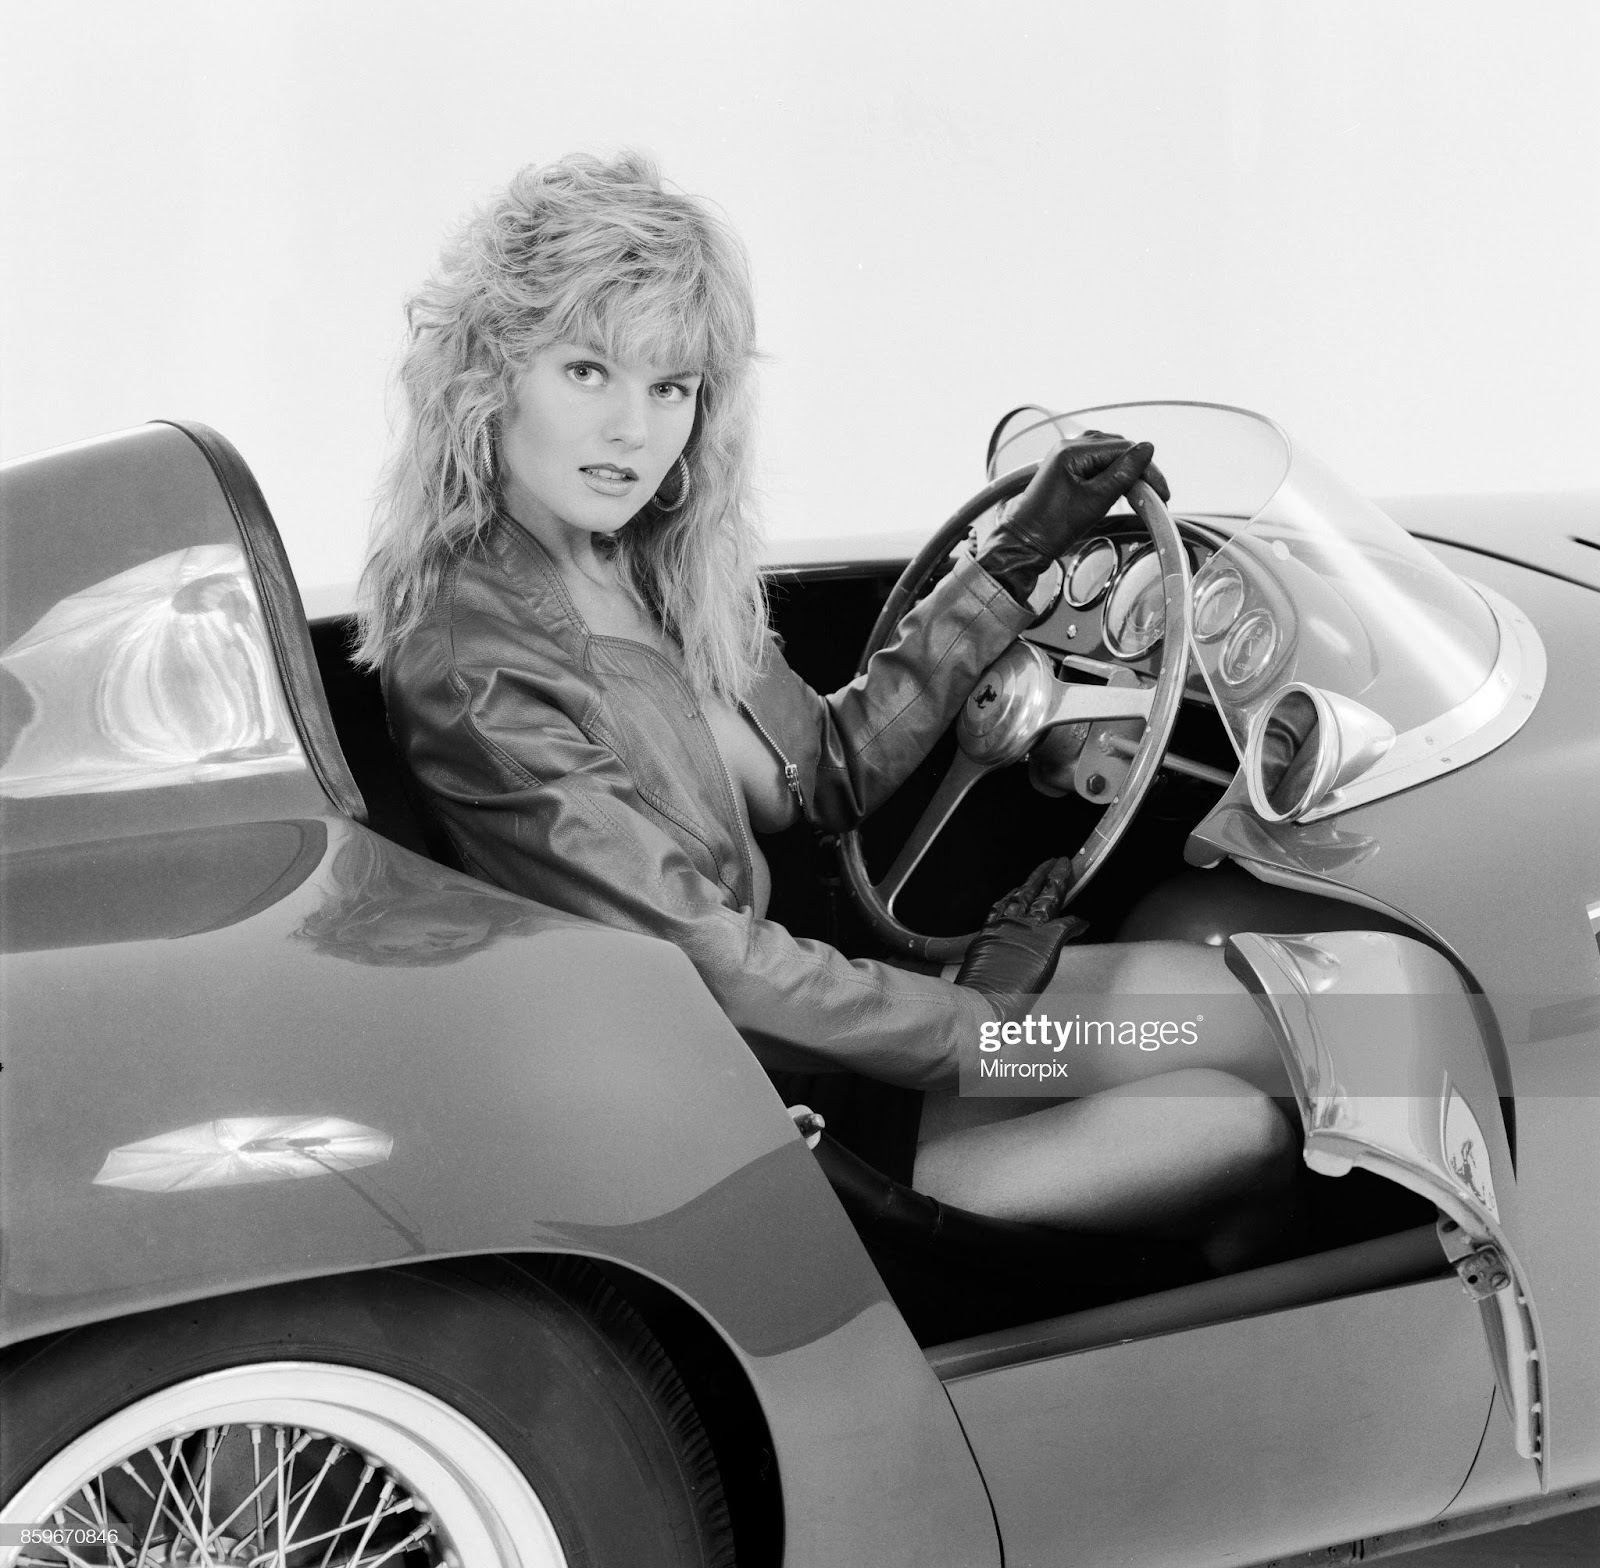 D:\Documenti\posts\posts\Women and motorsport\foto\1988\glamour-model-caroline-delahunty-poses-sitting-in-the-drivers-seat-of-picture-id859670846.jpg